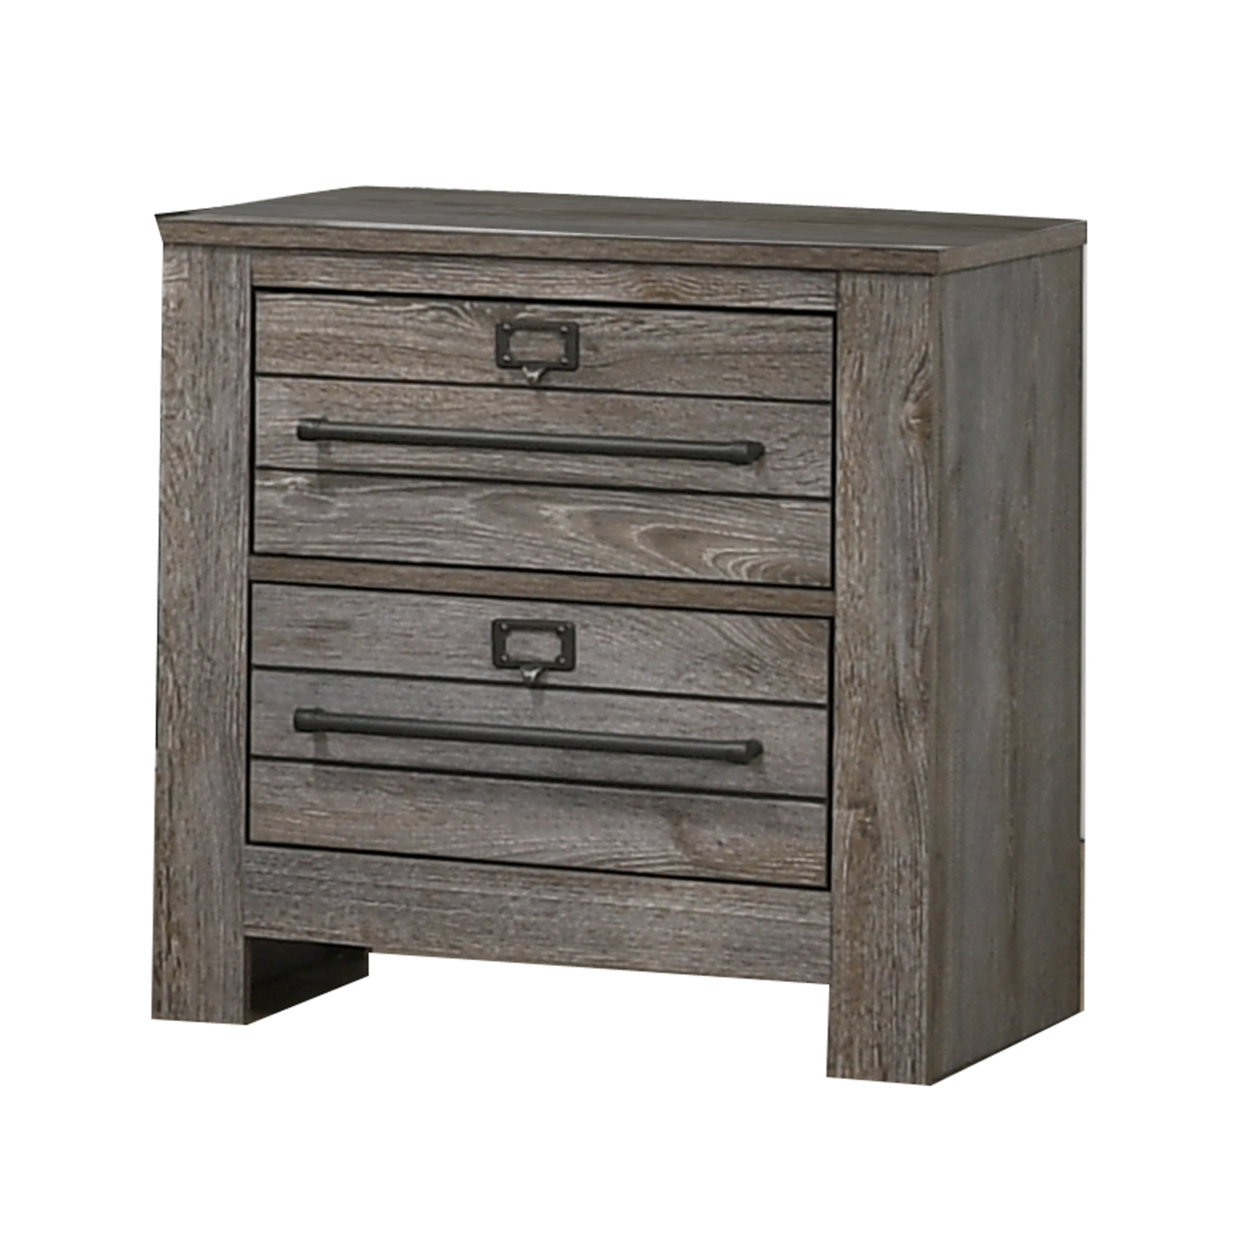 2 Drawer Wooden Nightstand With Metal Bar Pulls And Sled Base, Gray- Saltoro Sherpi